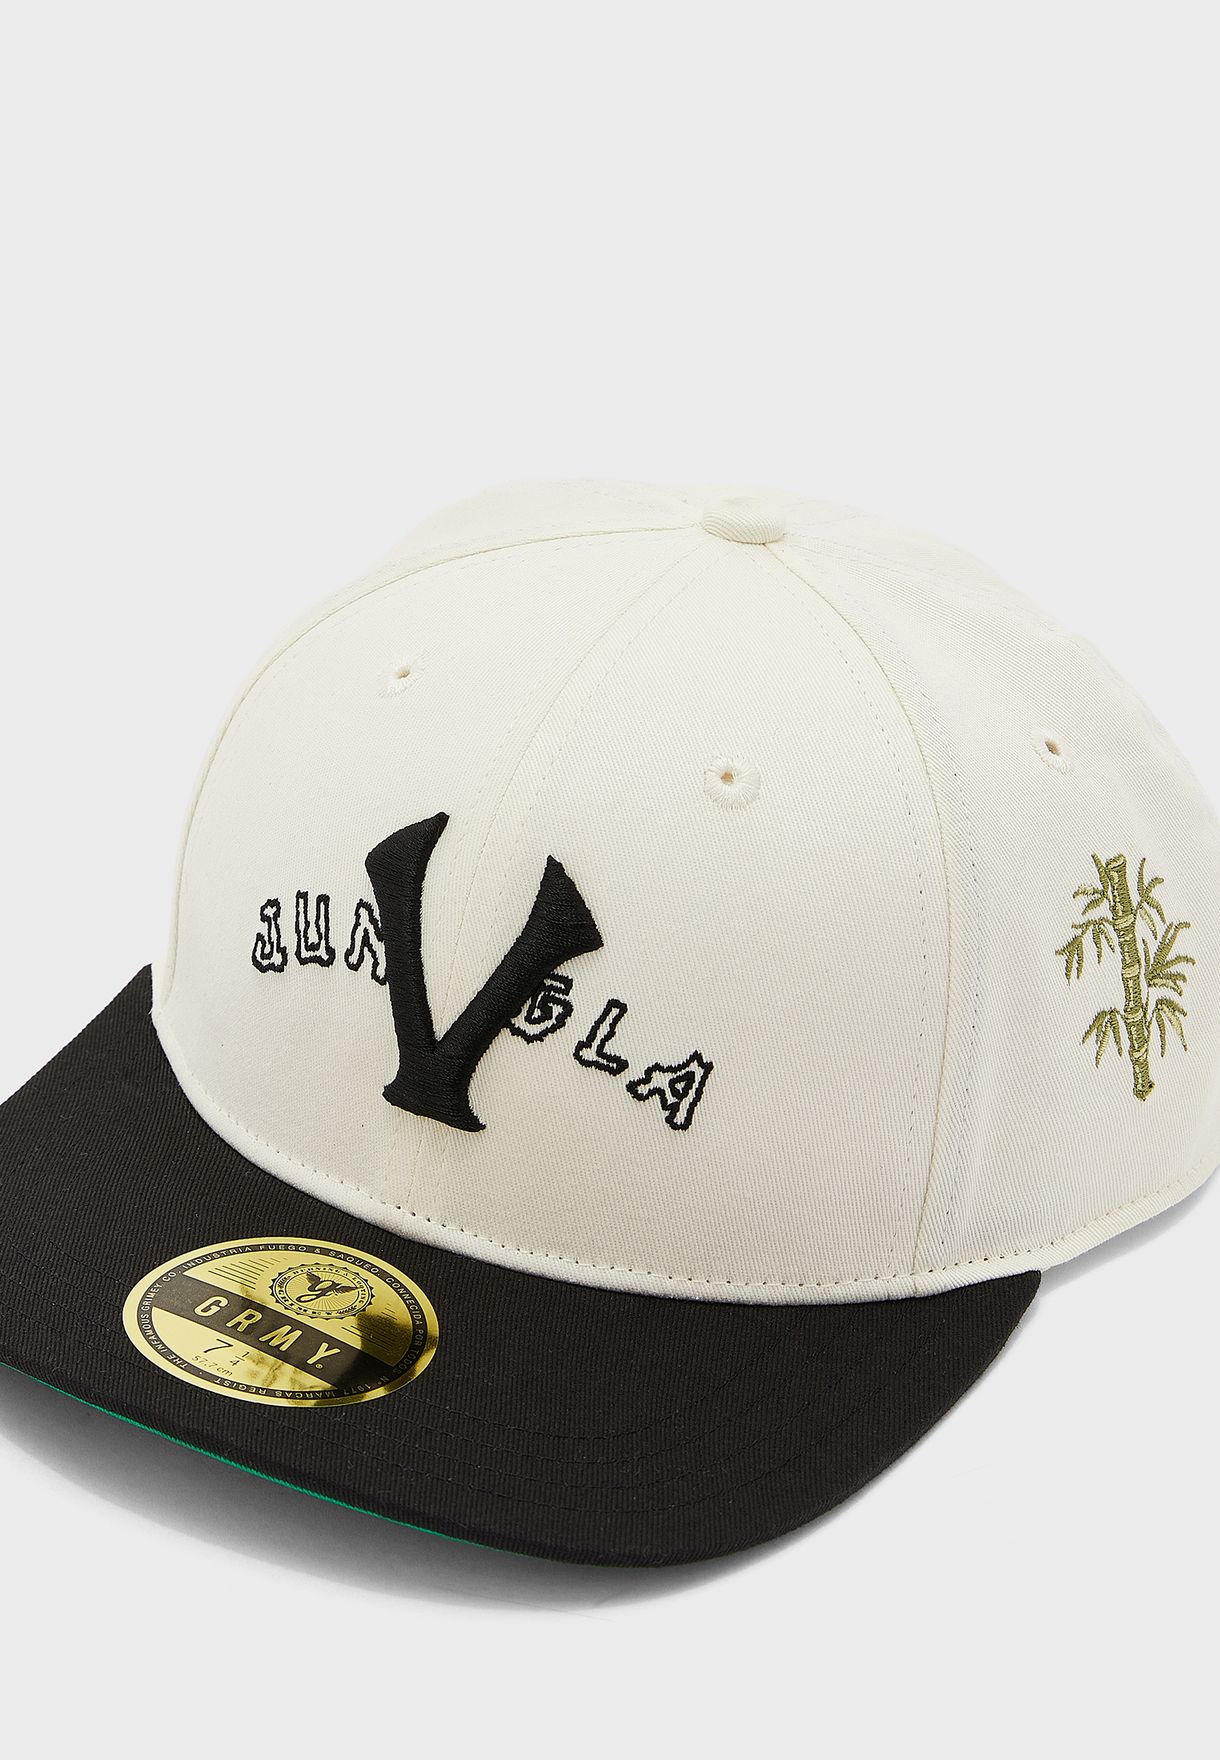 Logo Fitted Cap